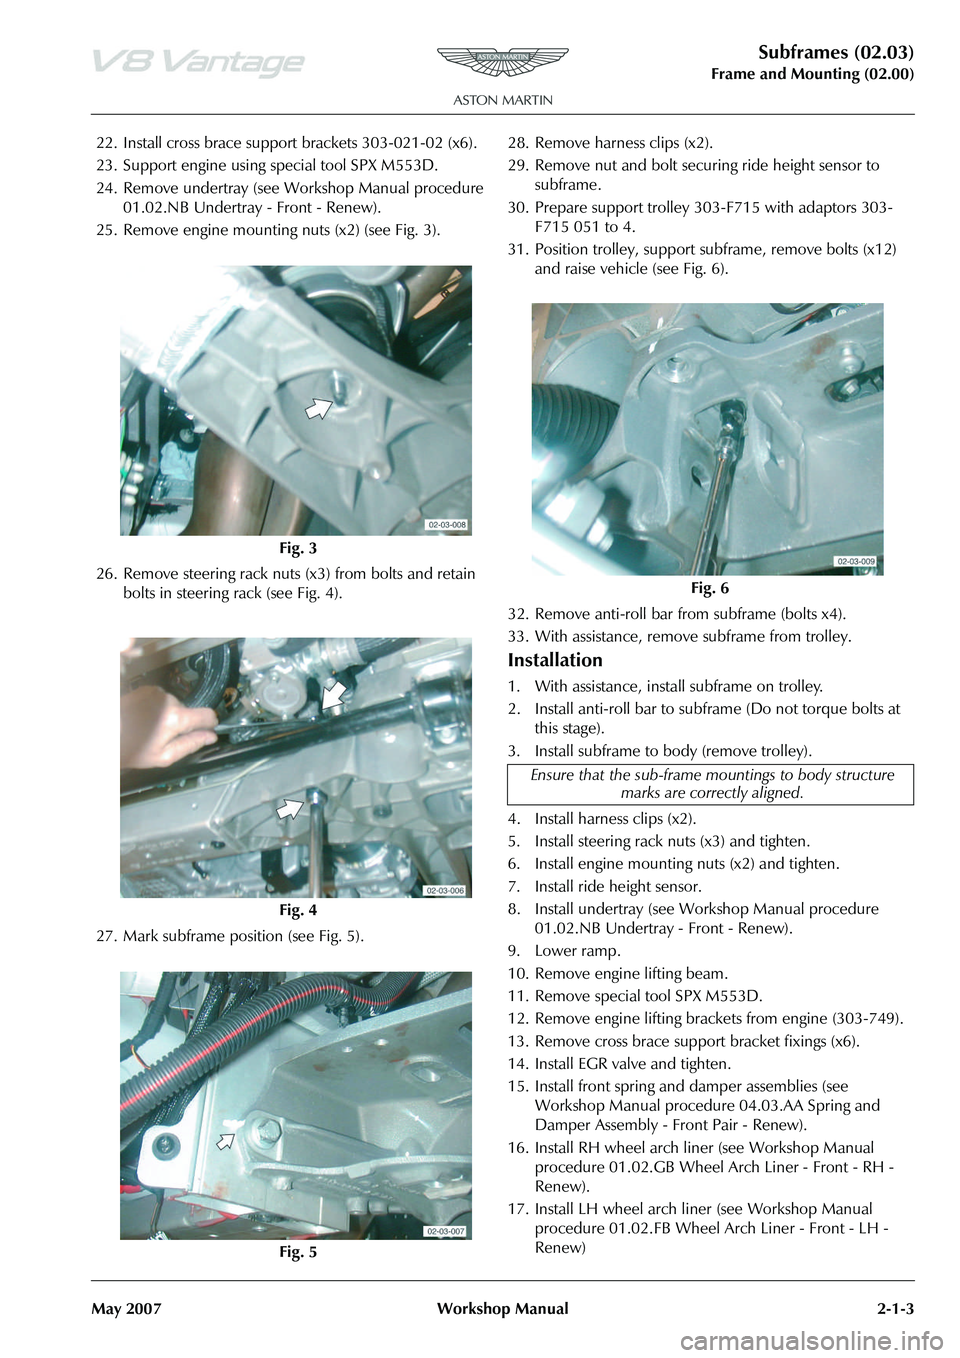 ASTON MARTIN V8 VANTAGE 2010  Workshop Manual Subframes (02.03)
Frame and Mounting (02.00)
May 2007 Workshop Manual 2-1-3
22. Install cross brace support brackets 303-021-02 (x6).
23. Support engine using special tool SPX M553D.
24. Remove undert